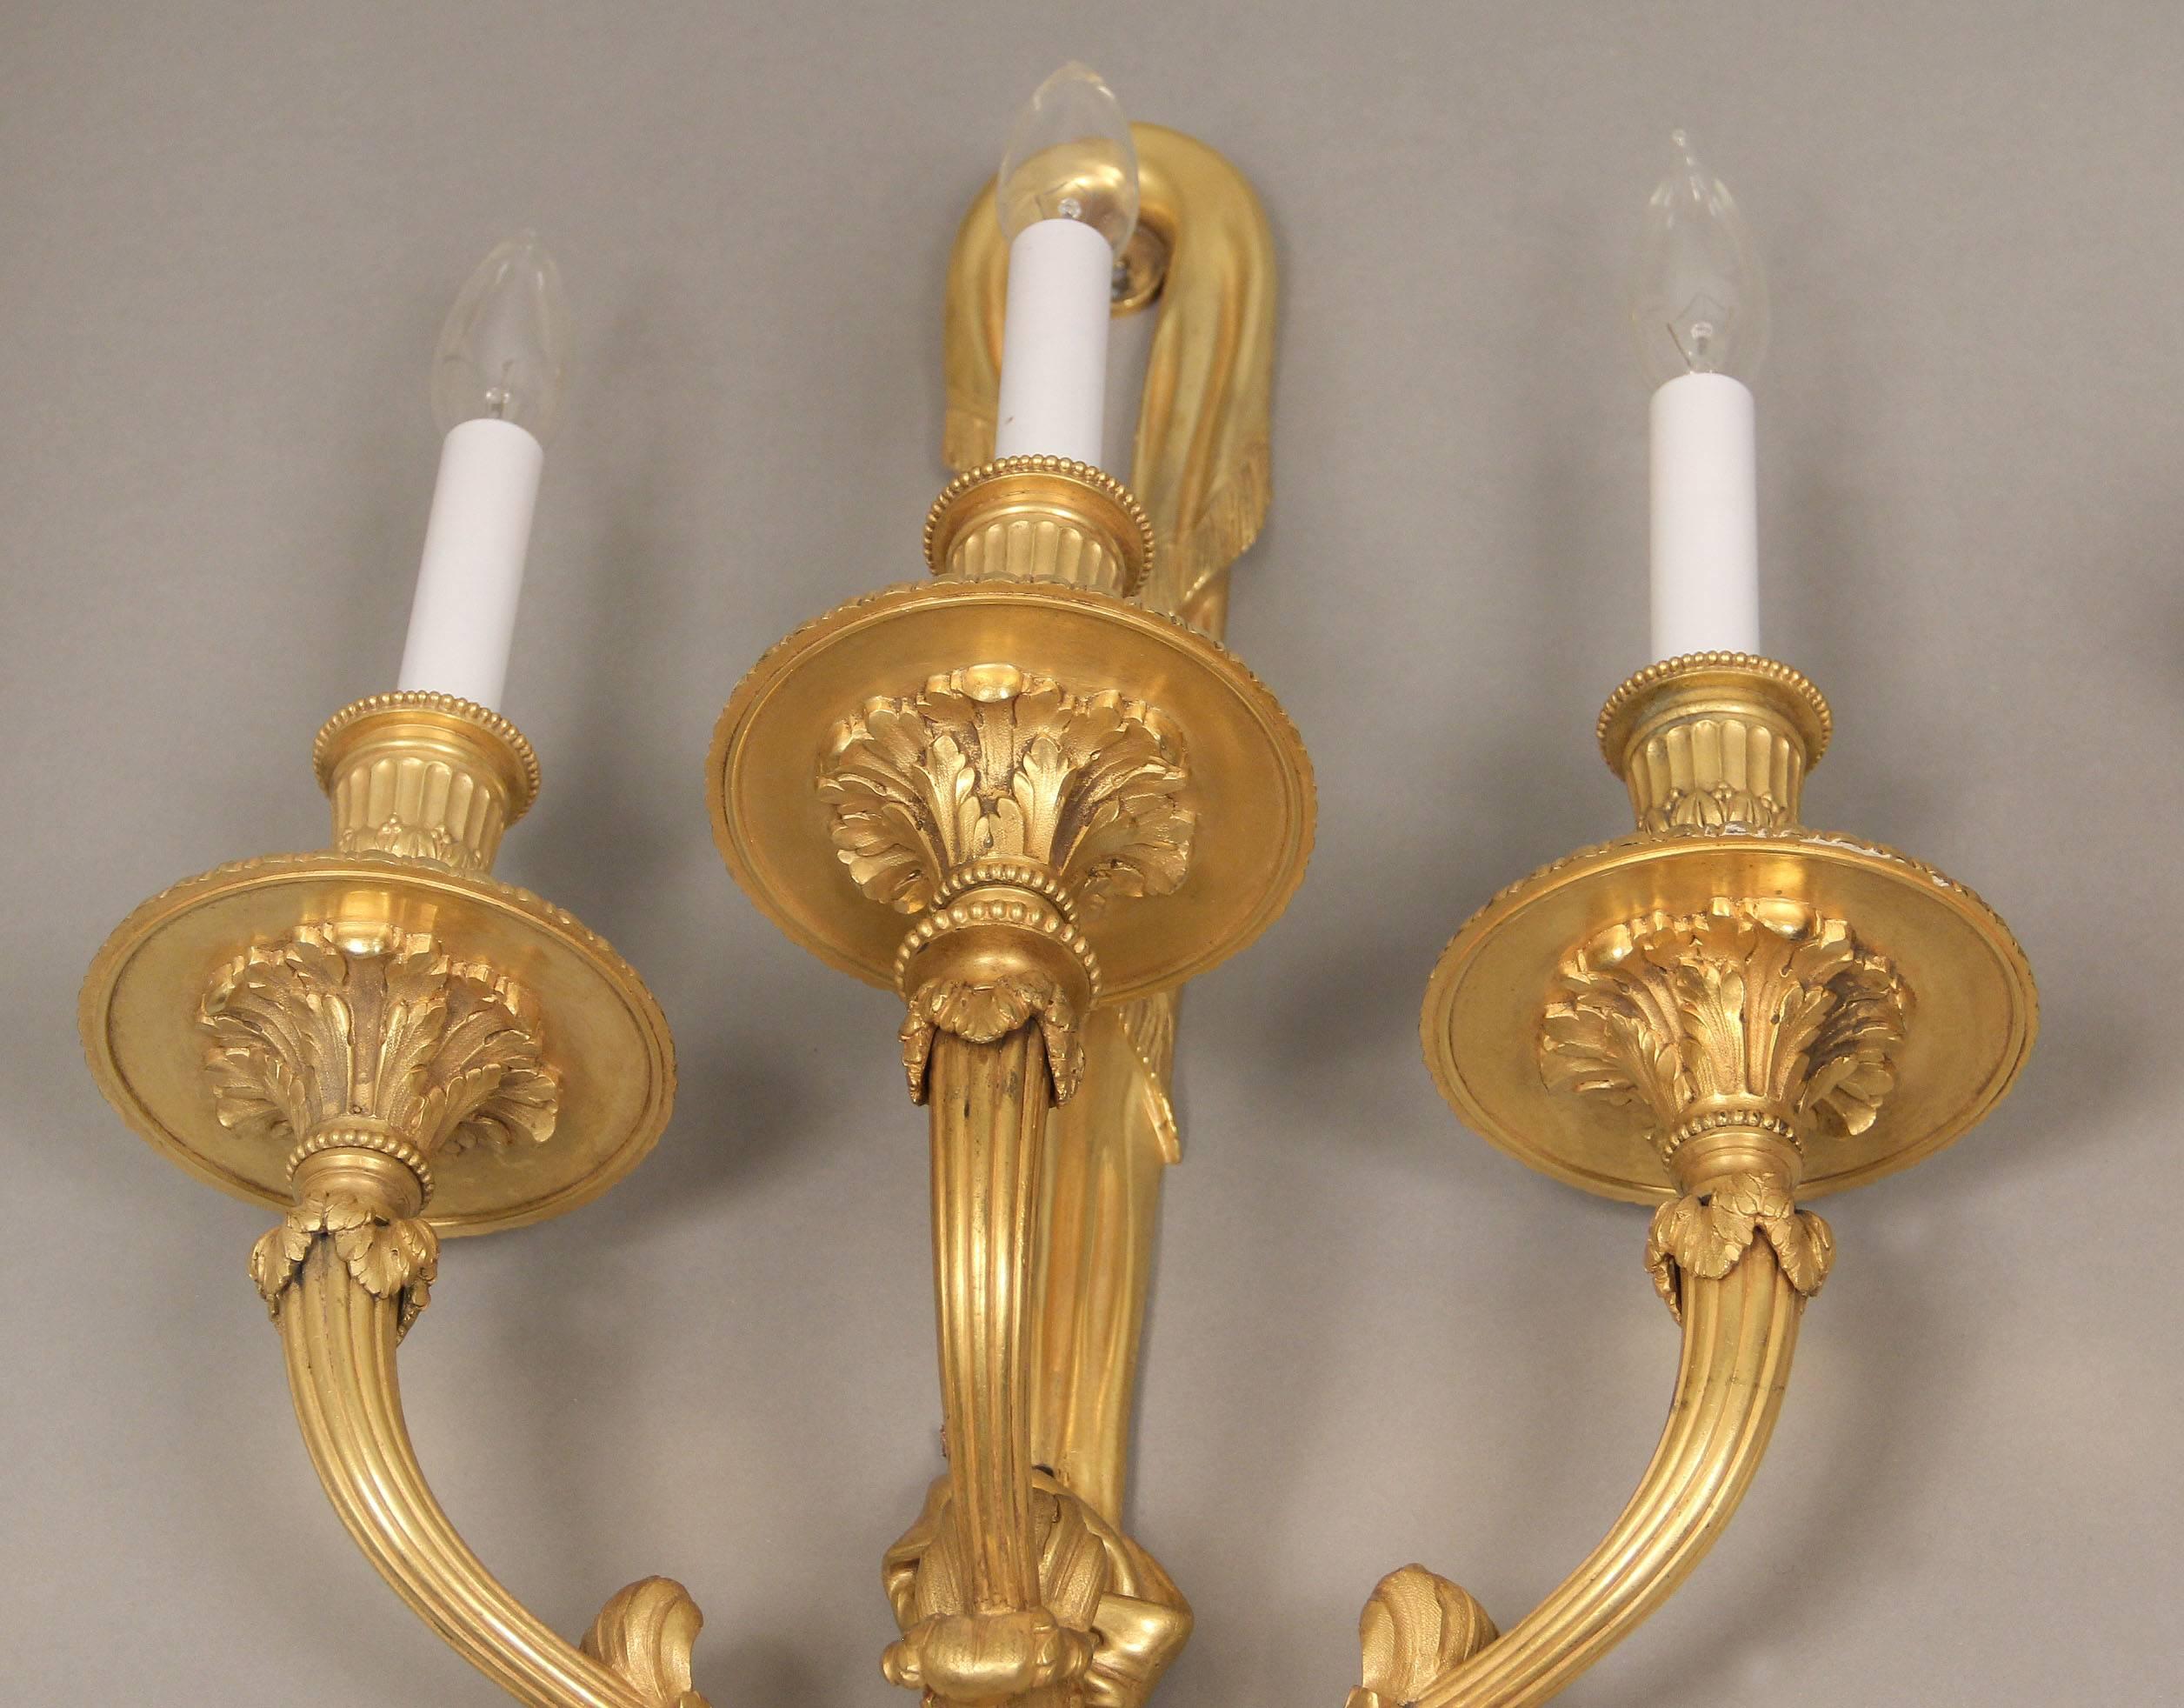 Excellent Pair of Early 20th Century Gilt Bronze Sconces by Caldwell In Good Condition For Sale In New York, NY